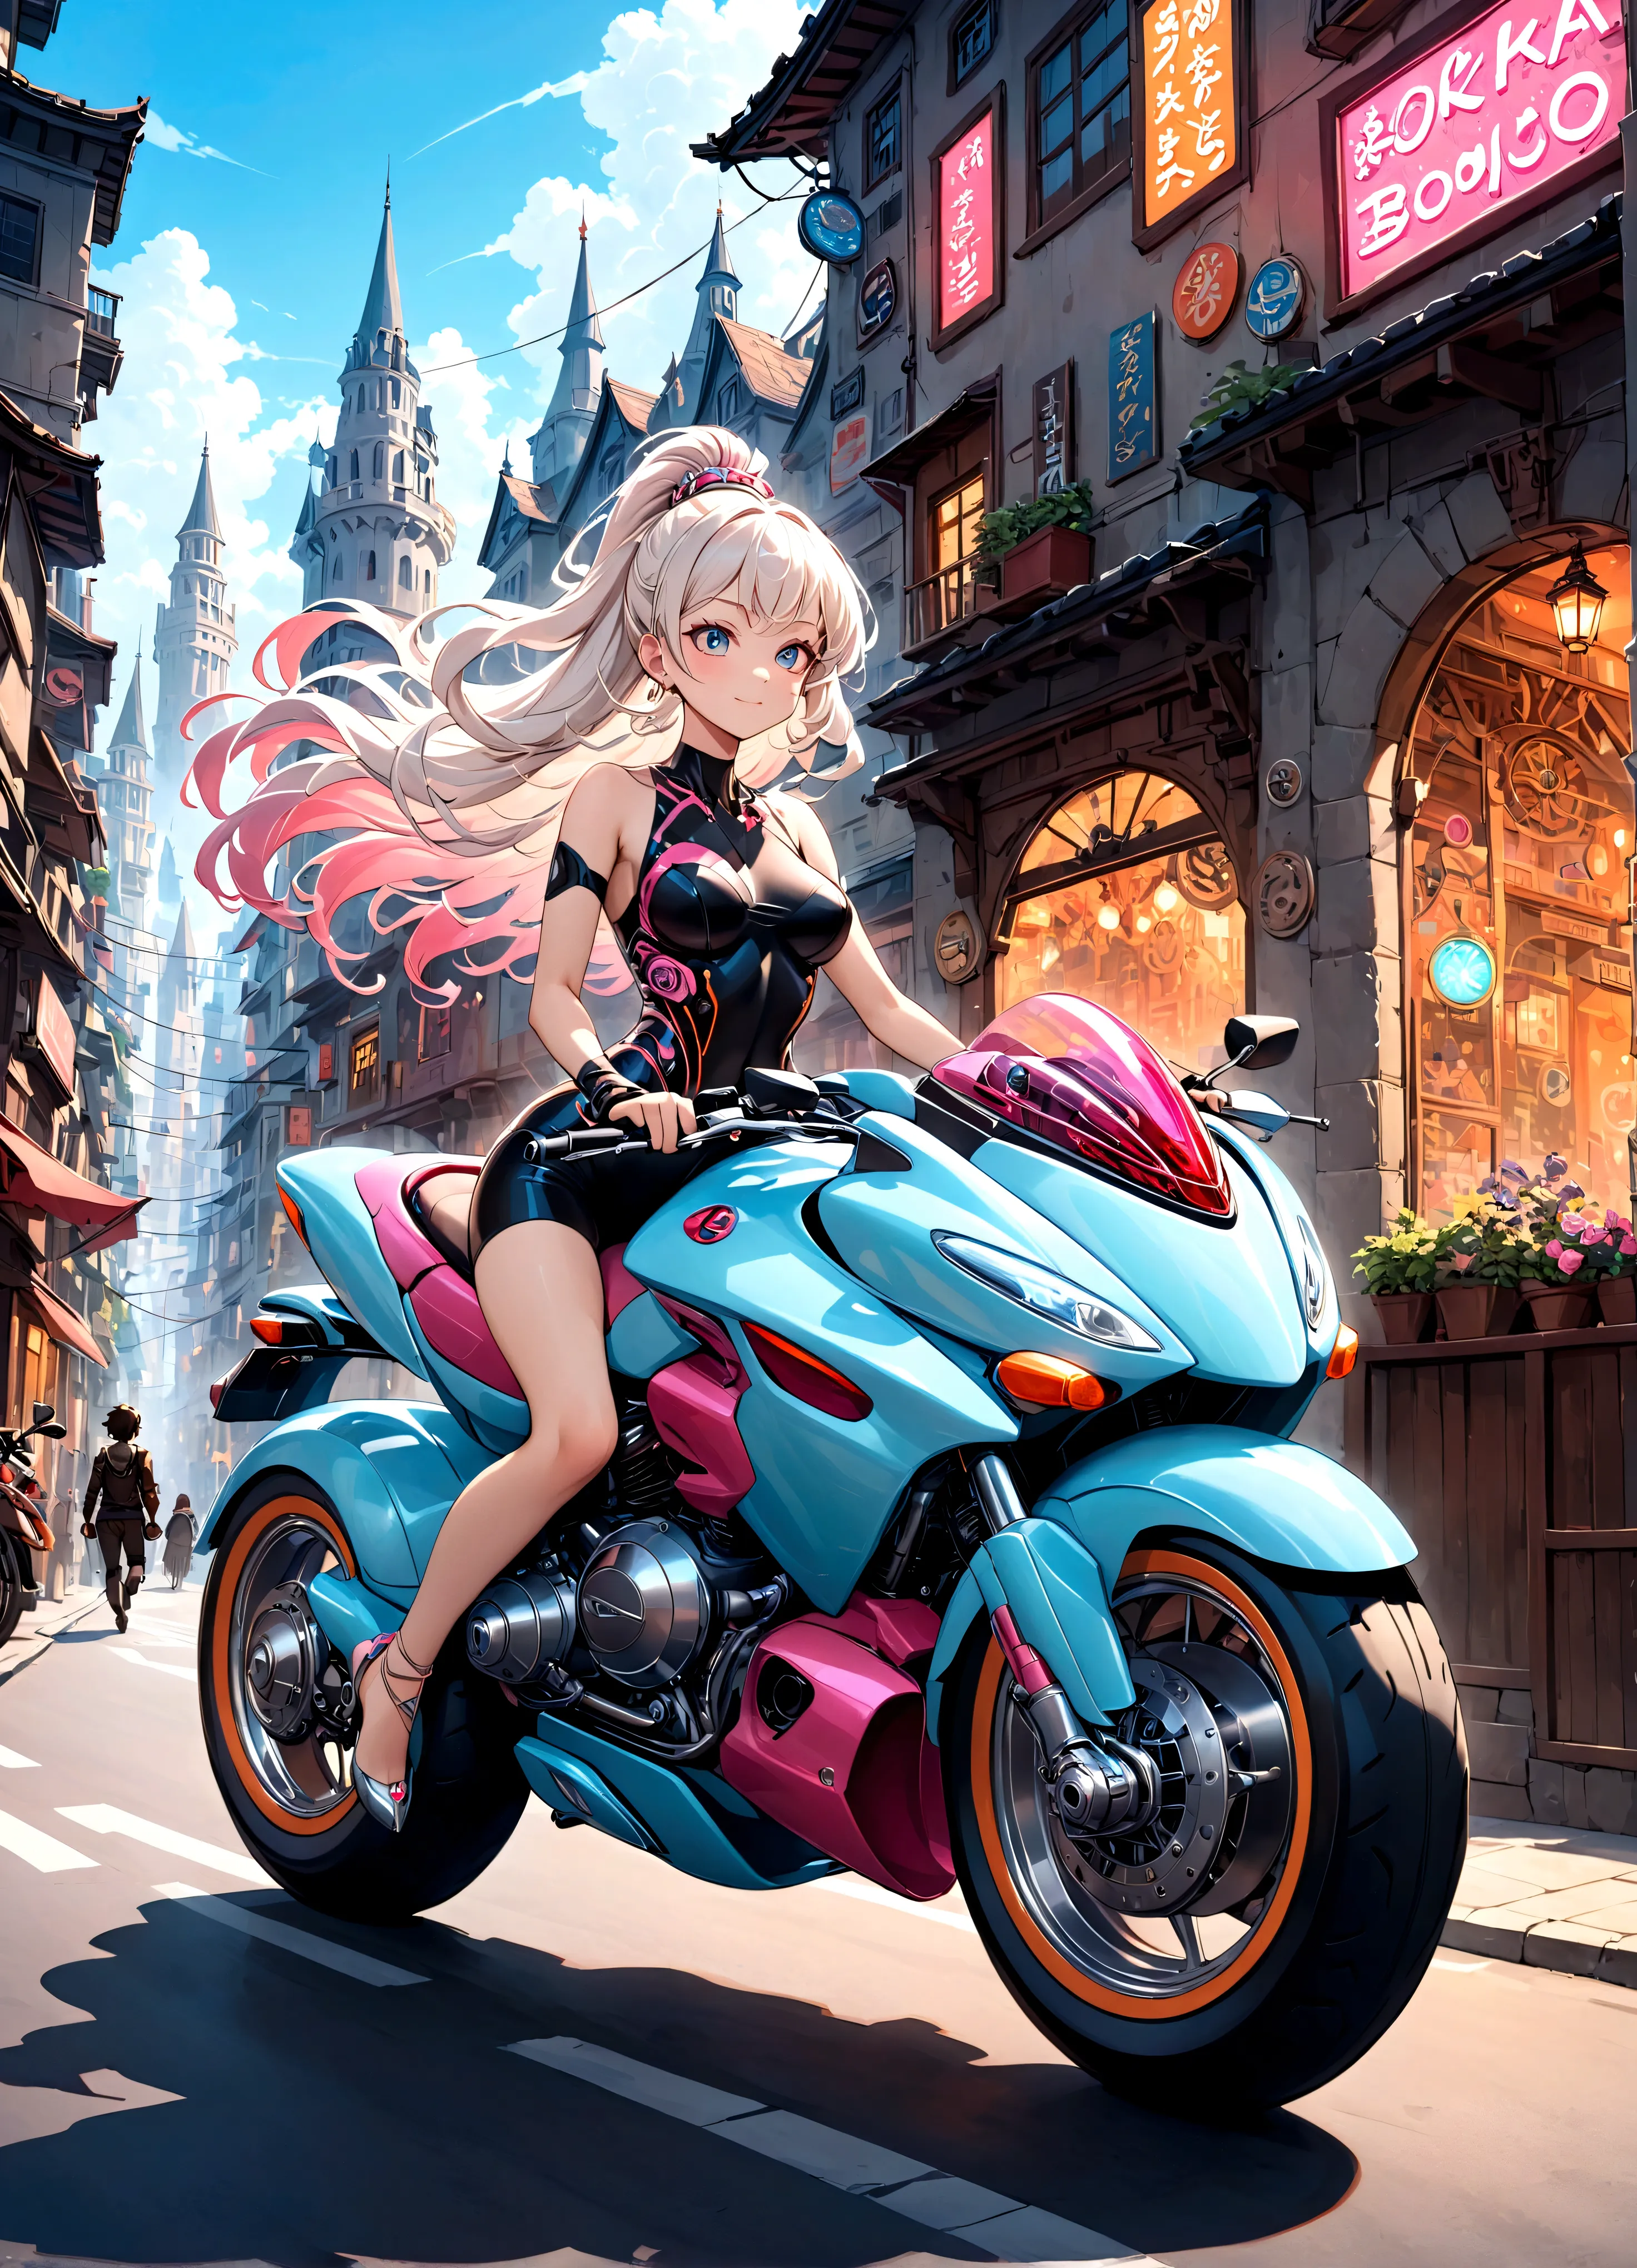 An intricately detailed and colorful motorcycle in the vibrant and imaginative style of Akira Toriyama. The motorcycle is futuri...